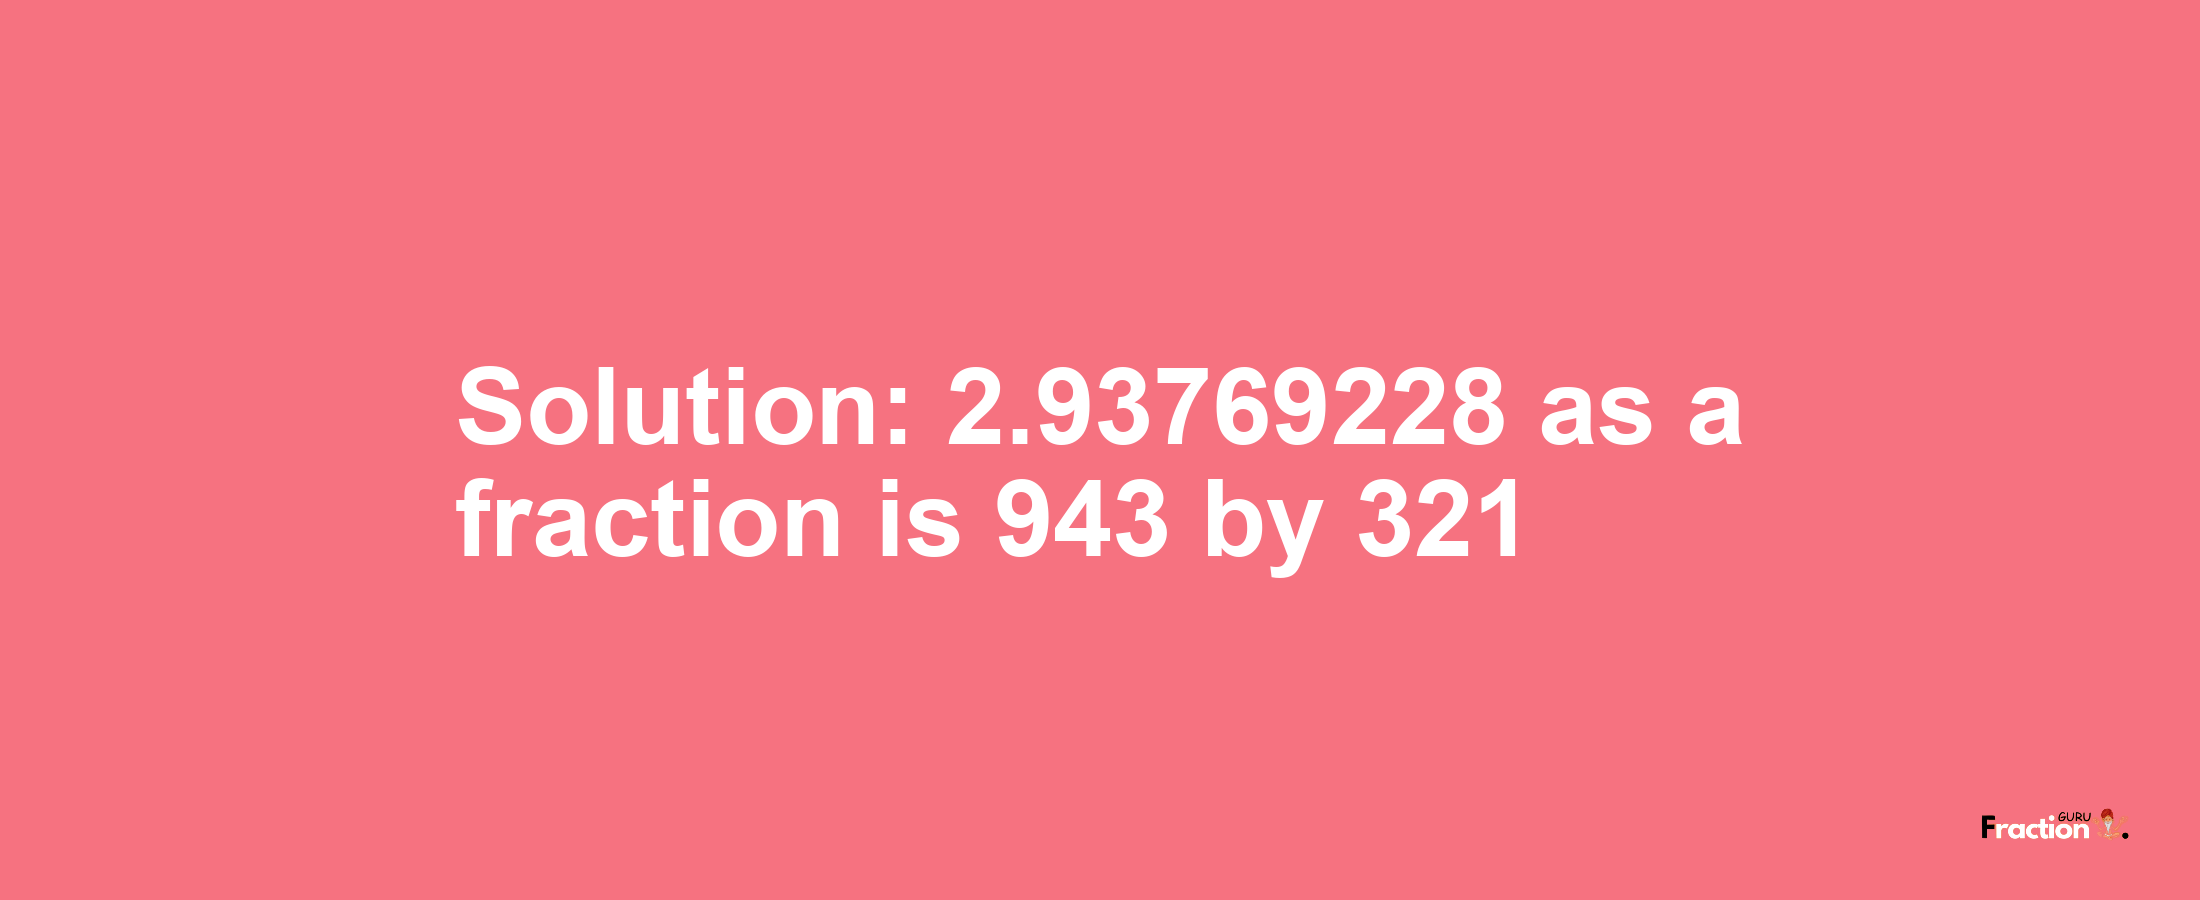 Solution:2.93769228 as a fraction is 943/321